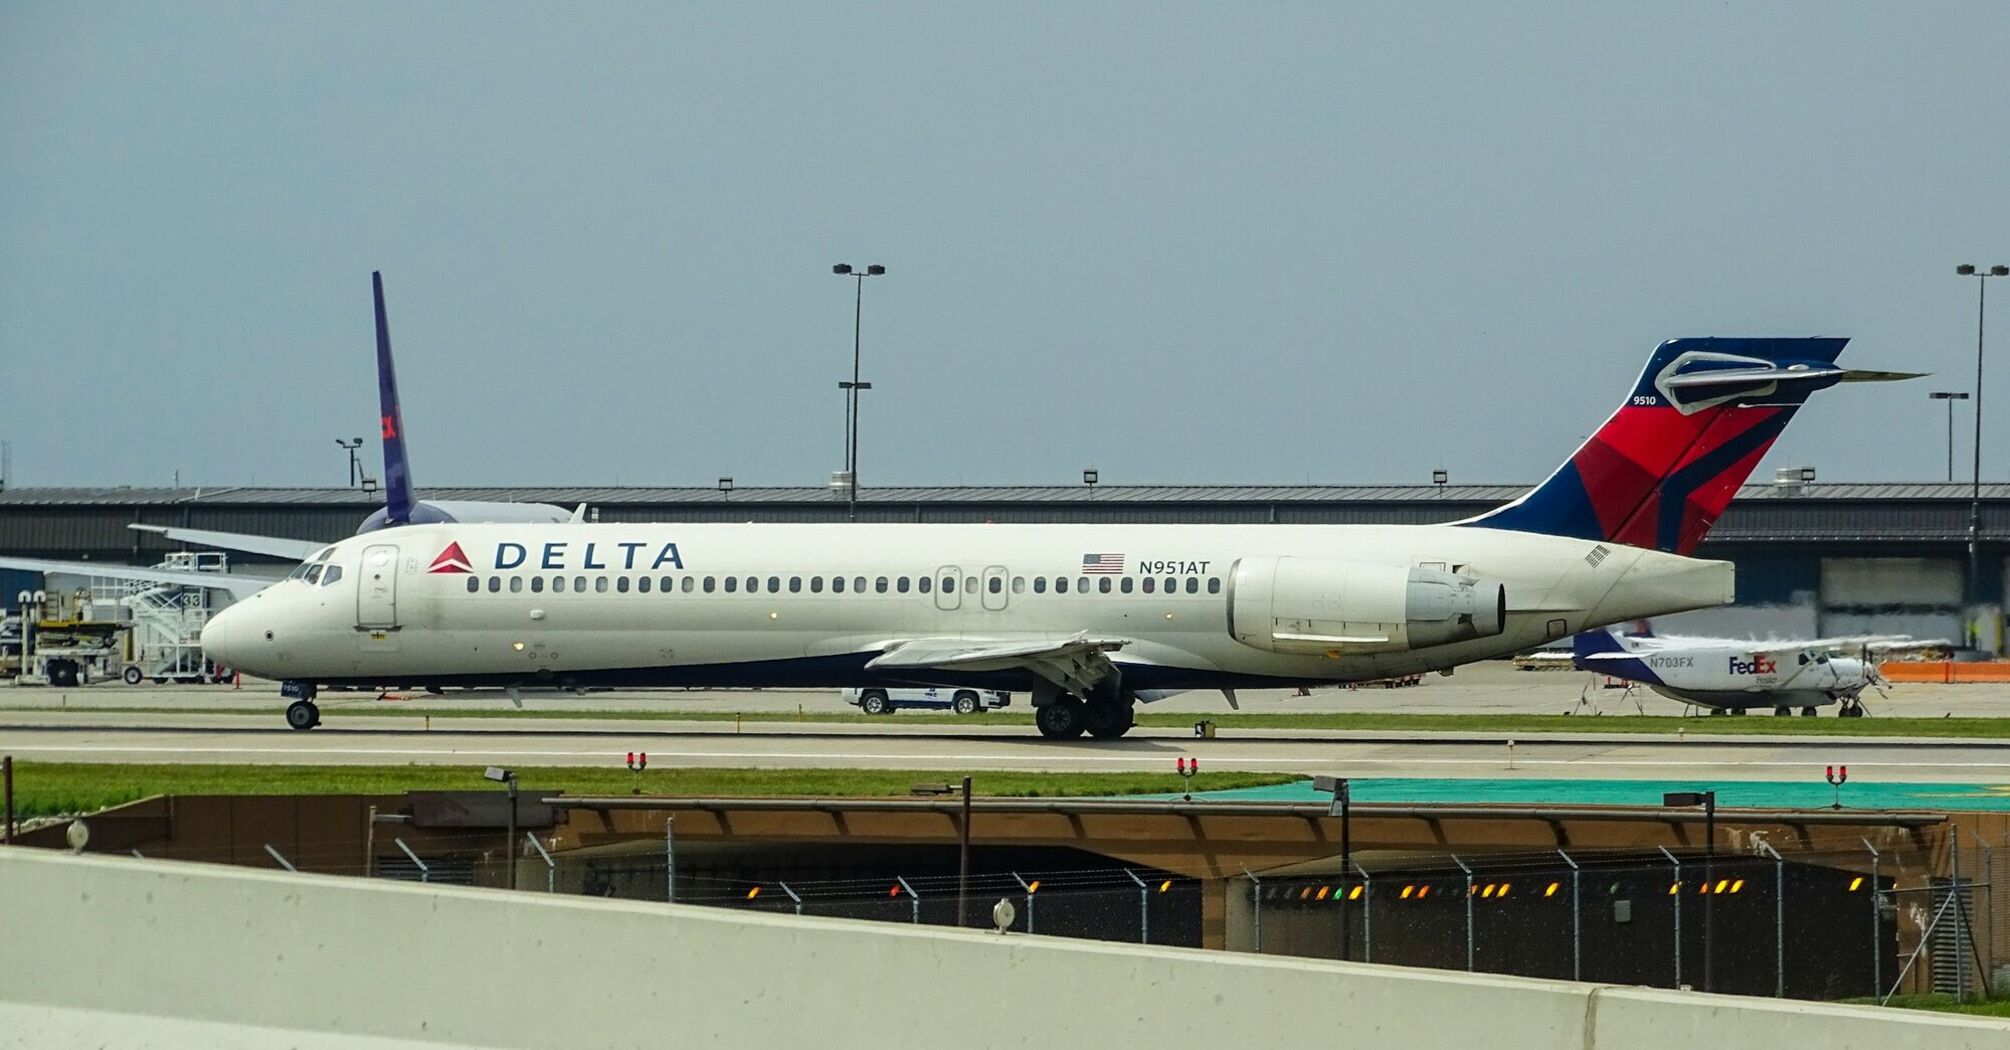 A Delta Airlines plane taxiing on the tarmac at an airport, with other aviation activity in the background